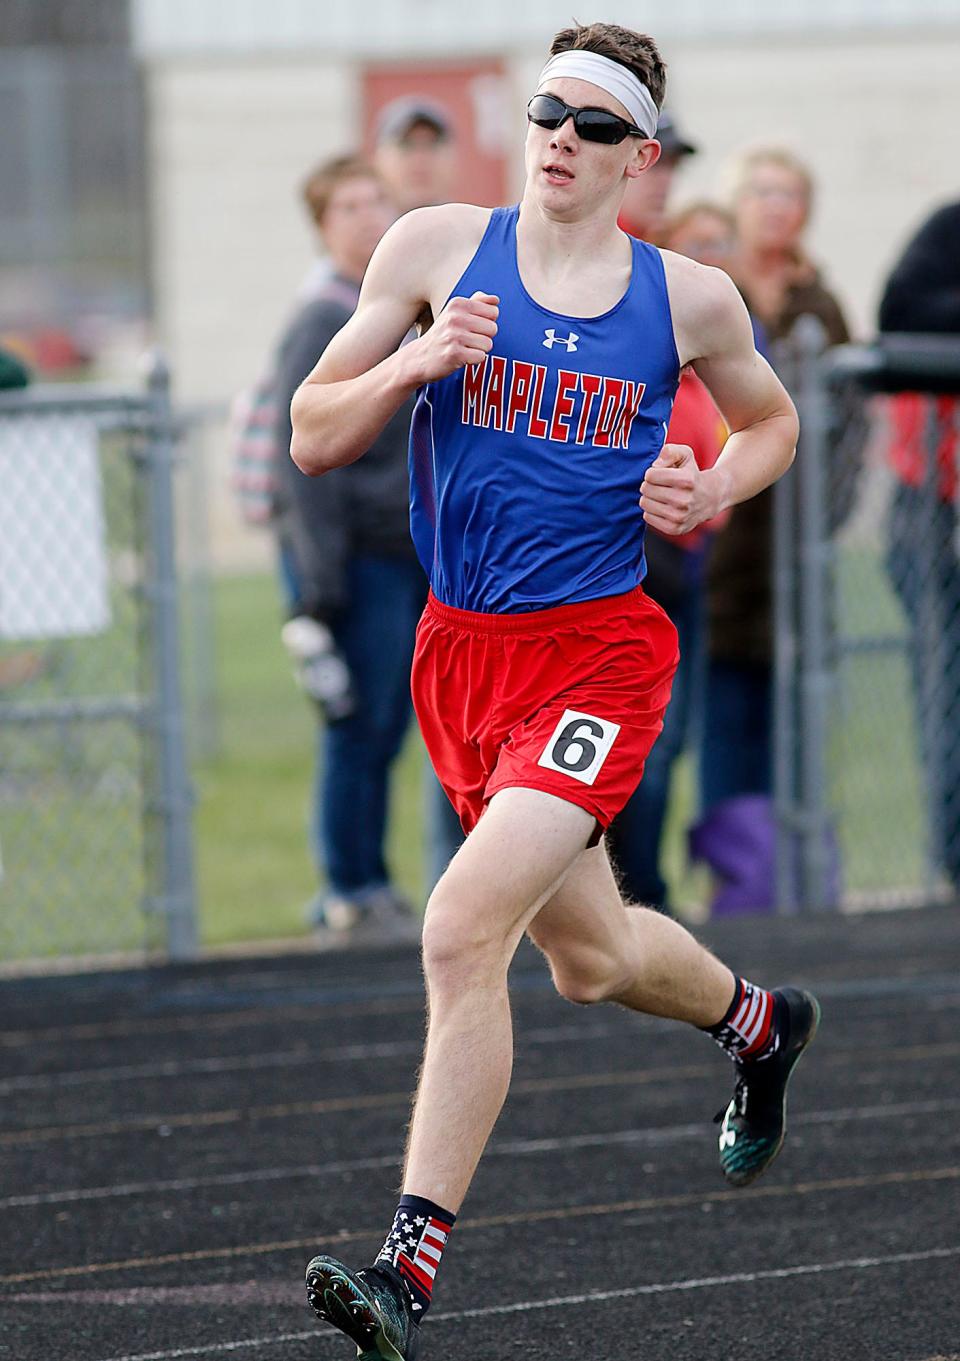 Mapleton's Isaik Schoch competes in the 1600 meter run during the Forest Pruner Track Invitational at Crestview High School on Friday, April 22, 2022. TOM E. PUSKAR/TIMES-GAZETTE.COM